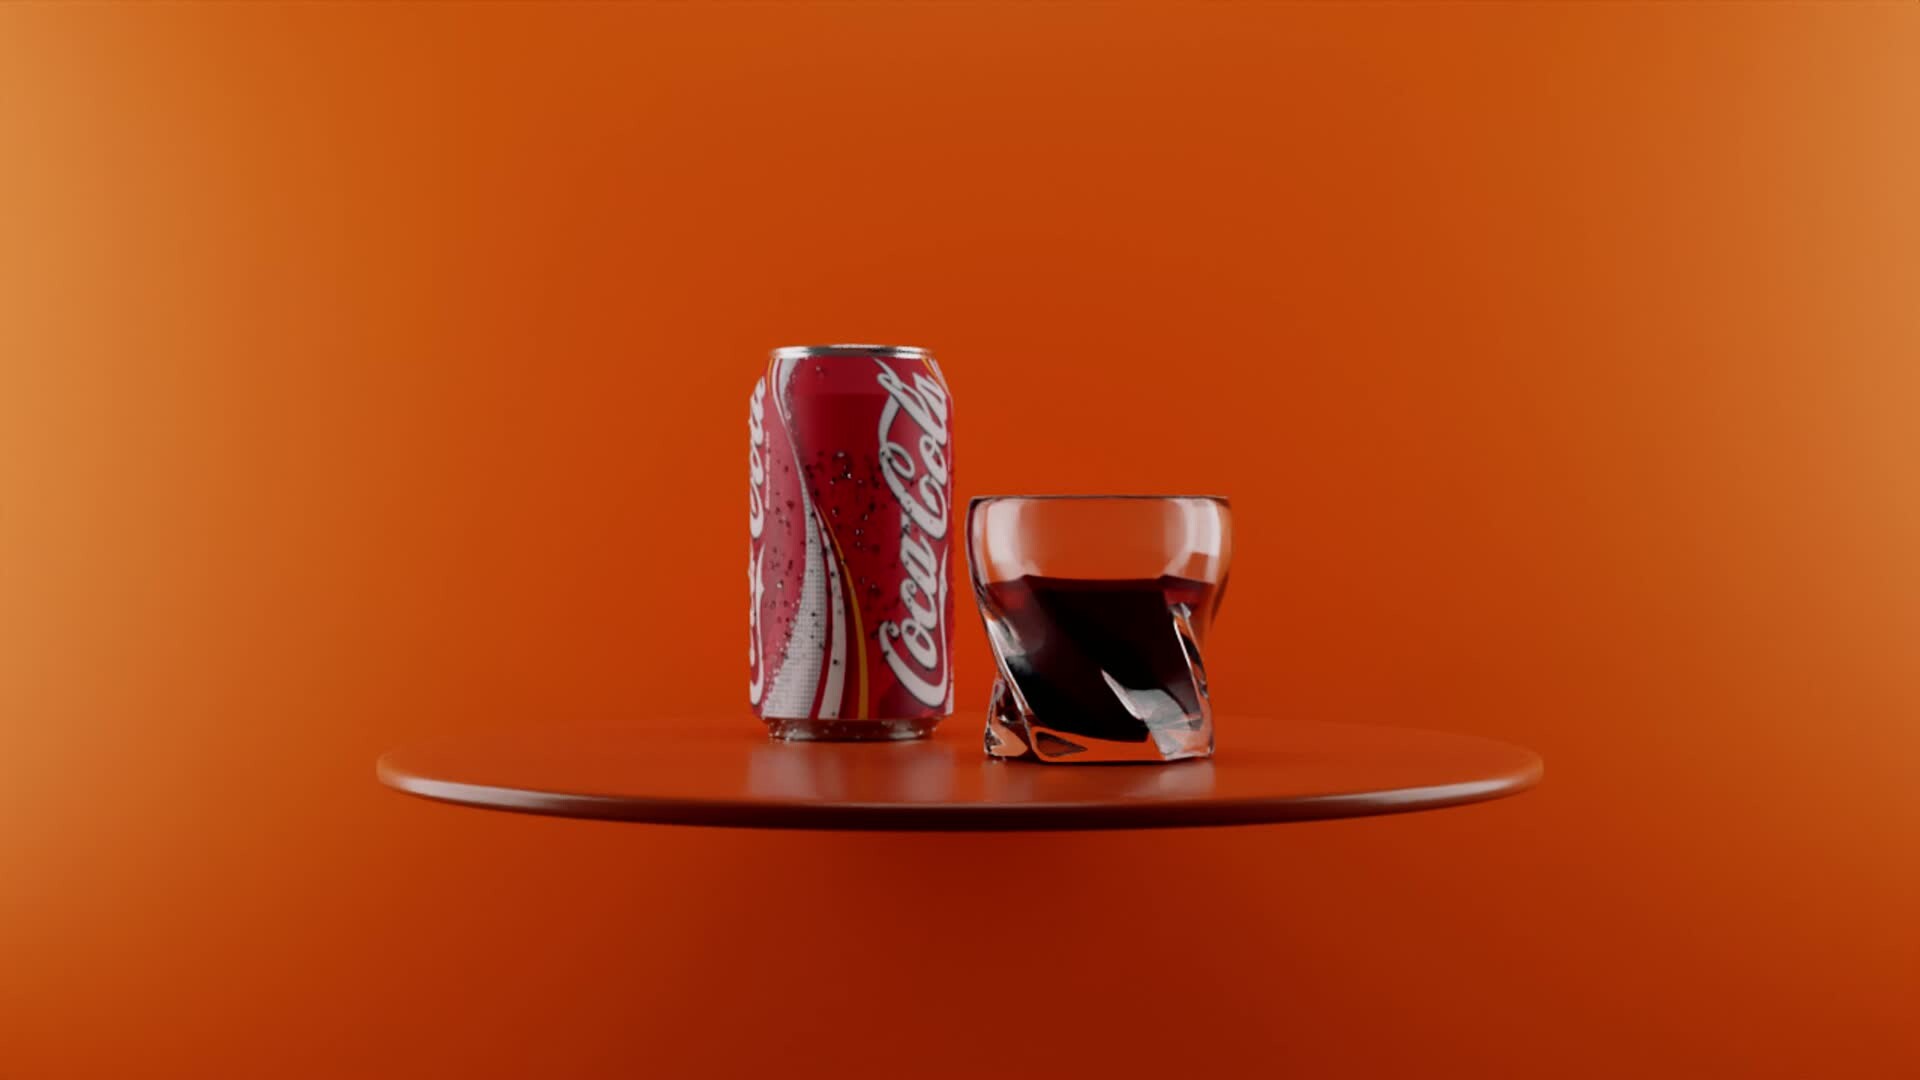 ArtStation - Canned Beverage Animated Commercial